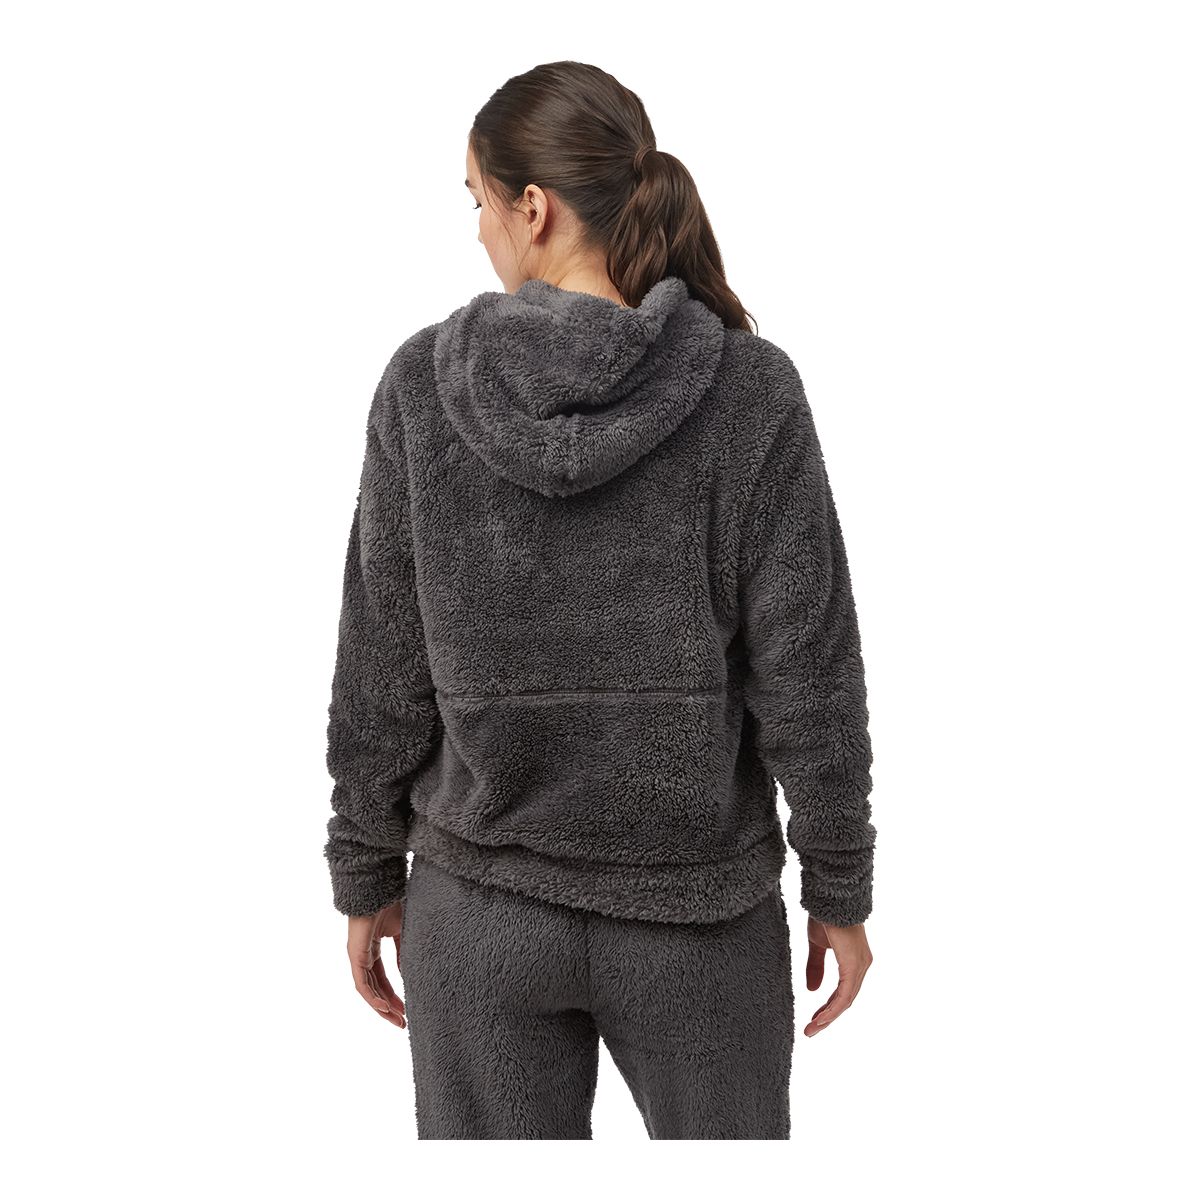 https://media-www.sportchek.ca/product/div-03-softgoods/dpt-72-casual-clothing/sdpt-02-womens/333944066/tentree-women-s-ecoloft-teddy-hoodie-306a0645-0fd6-488c-8e44-5db073252afd-jpgrendition.jpg?imdensity=1&imwidth=1244&impolicy=mZoom